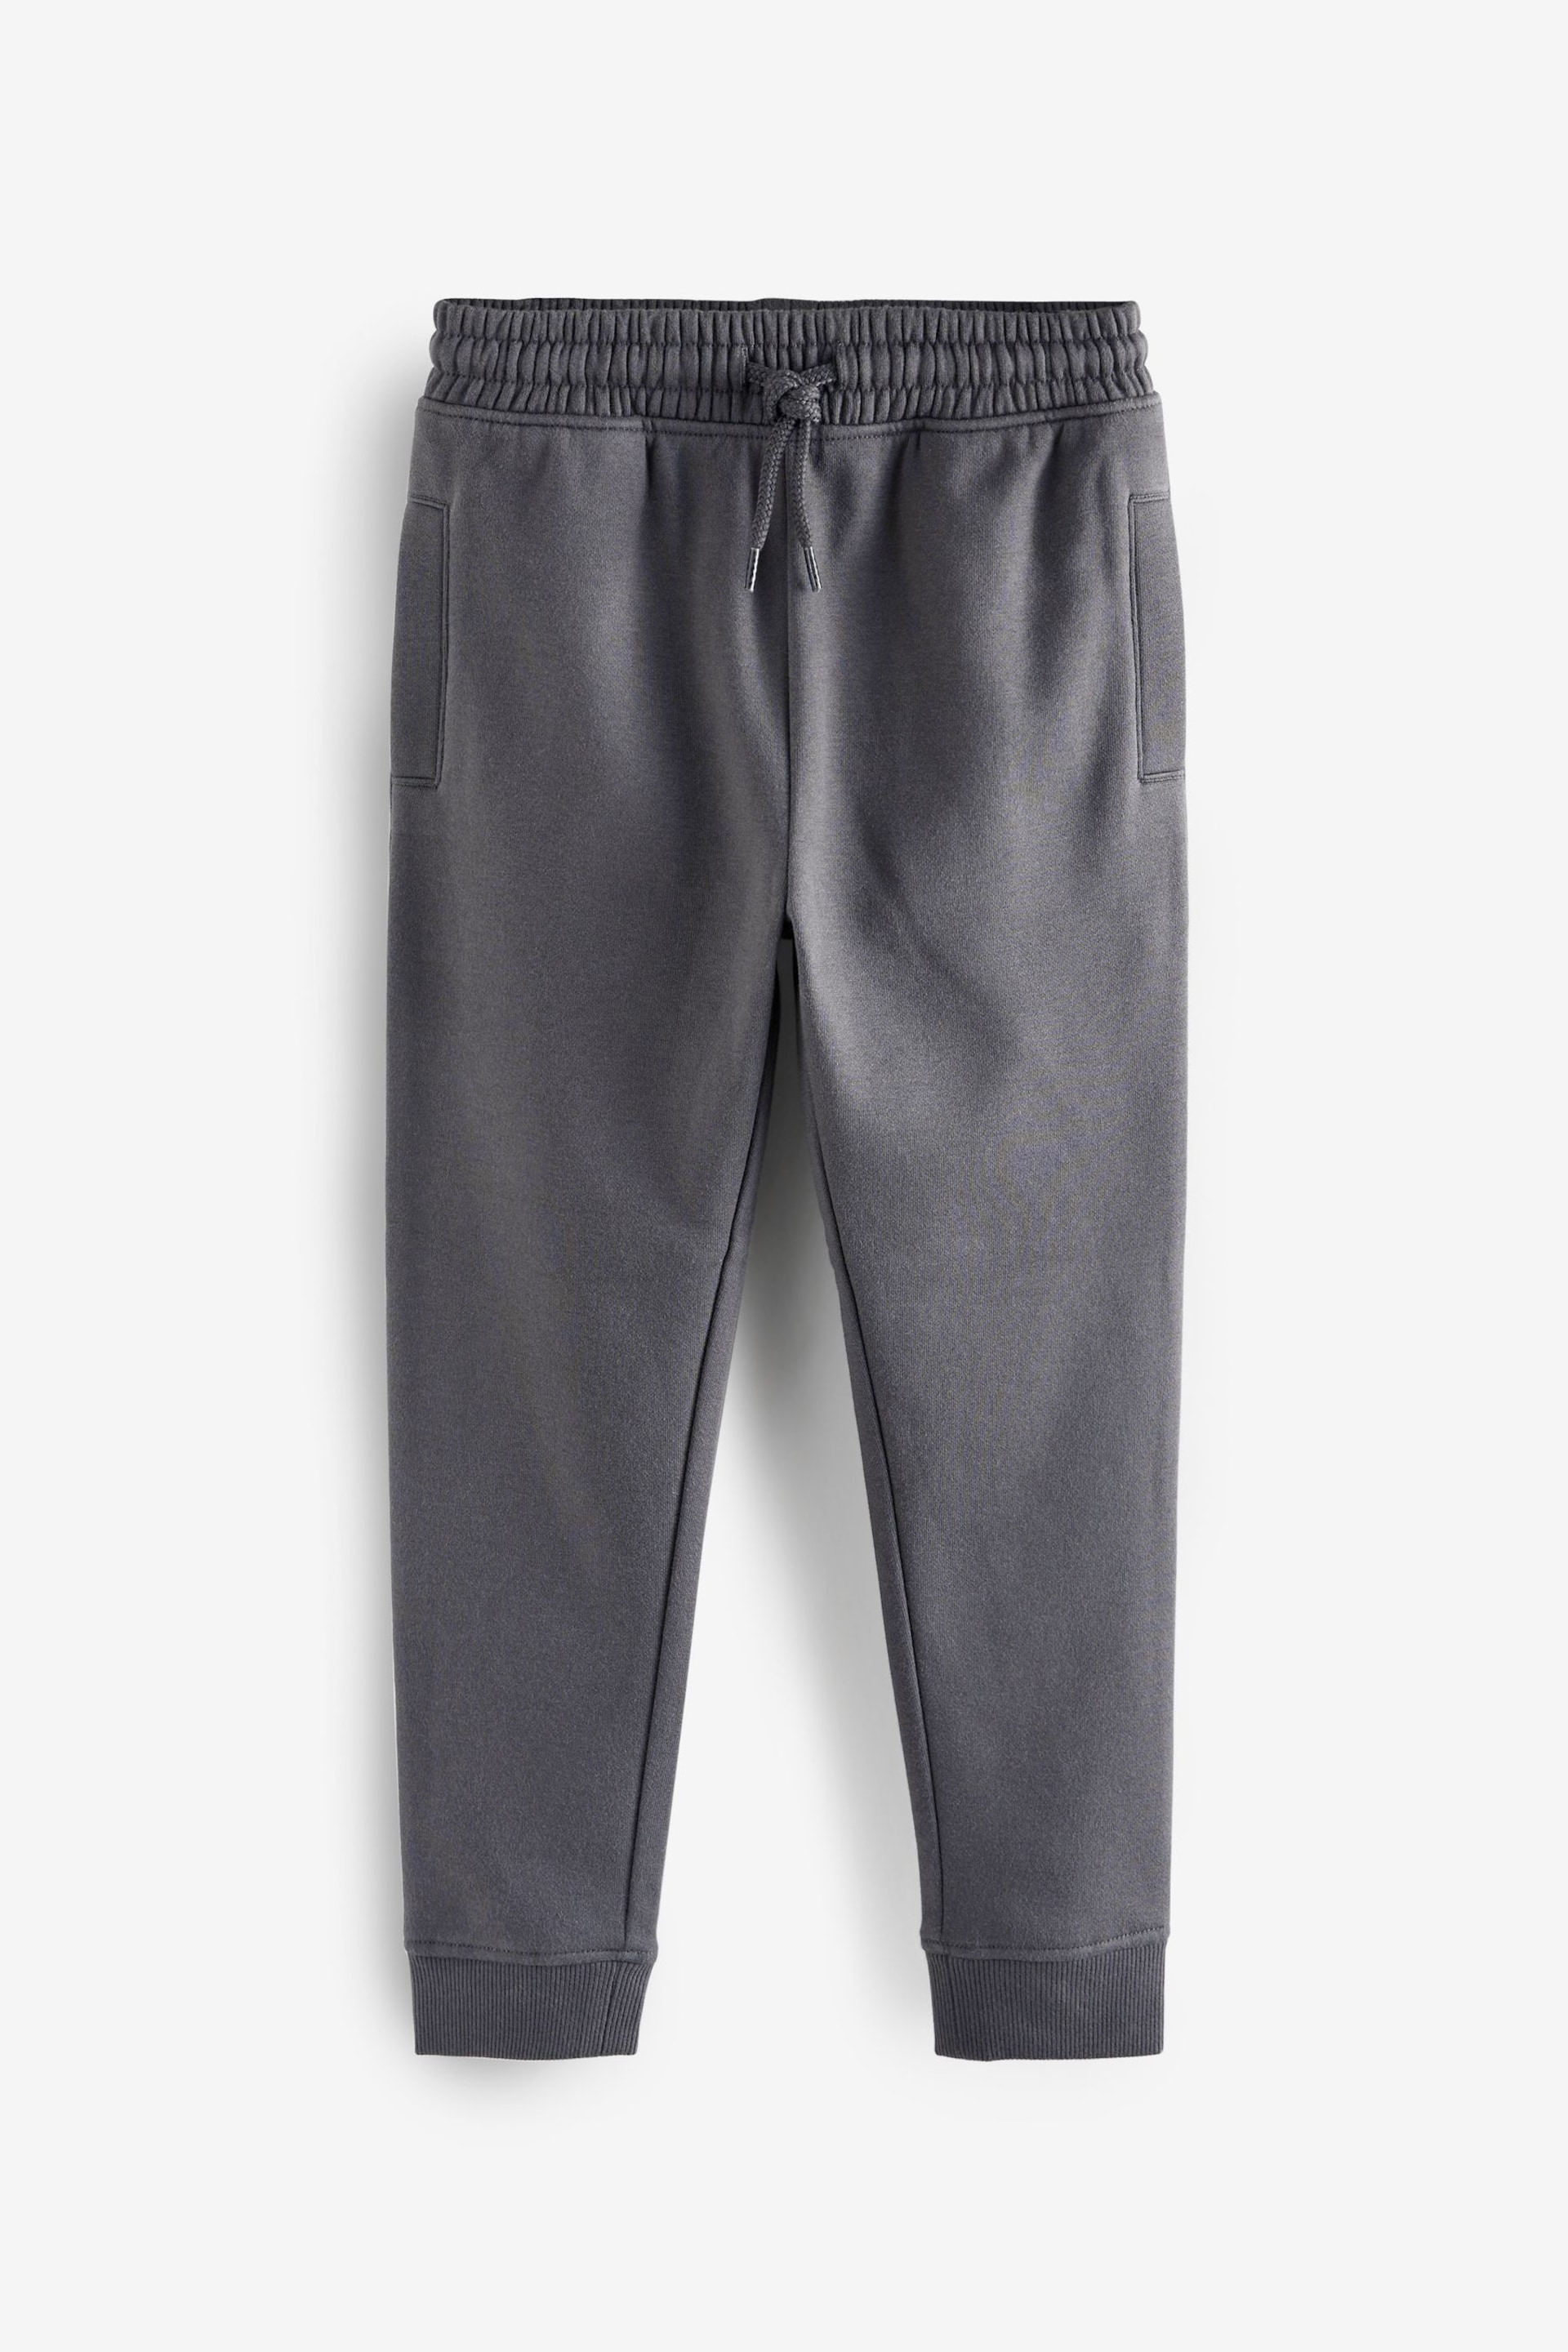 Charcoal Grey Skinny Fit Cuffed Joggers (3-16yrs) - Image 1 of 2